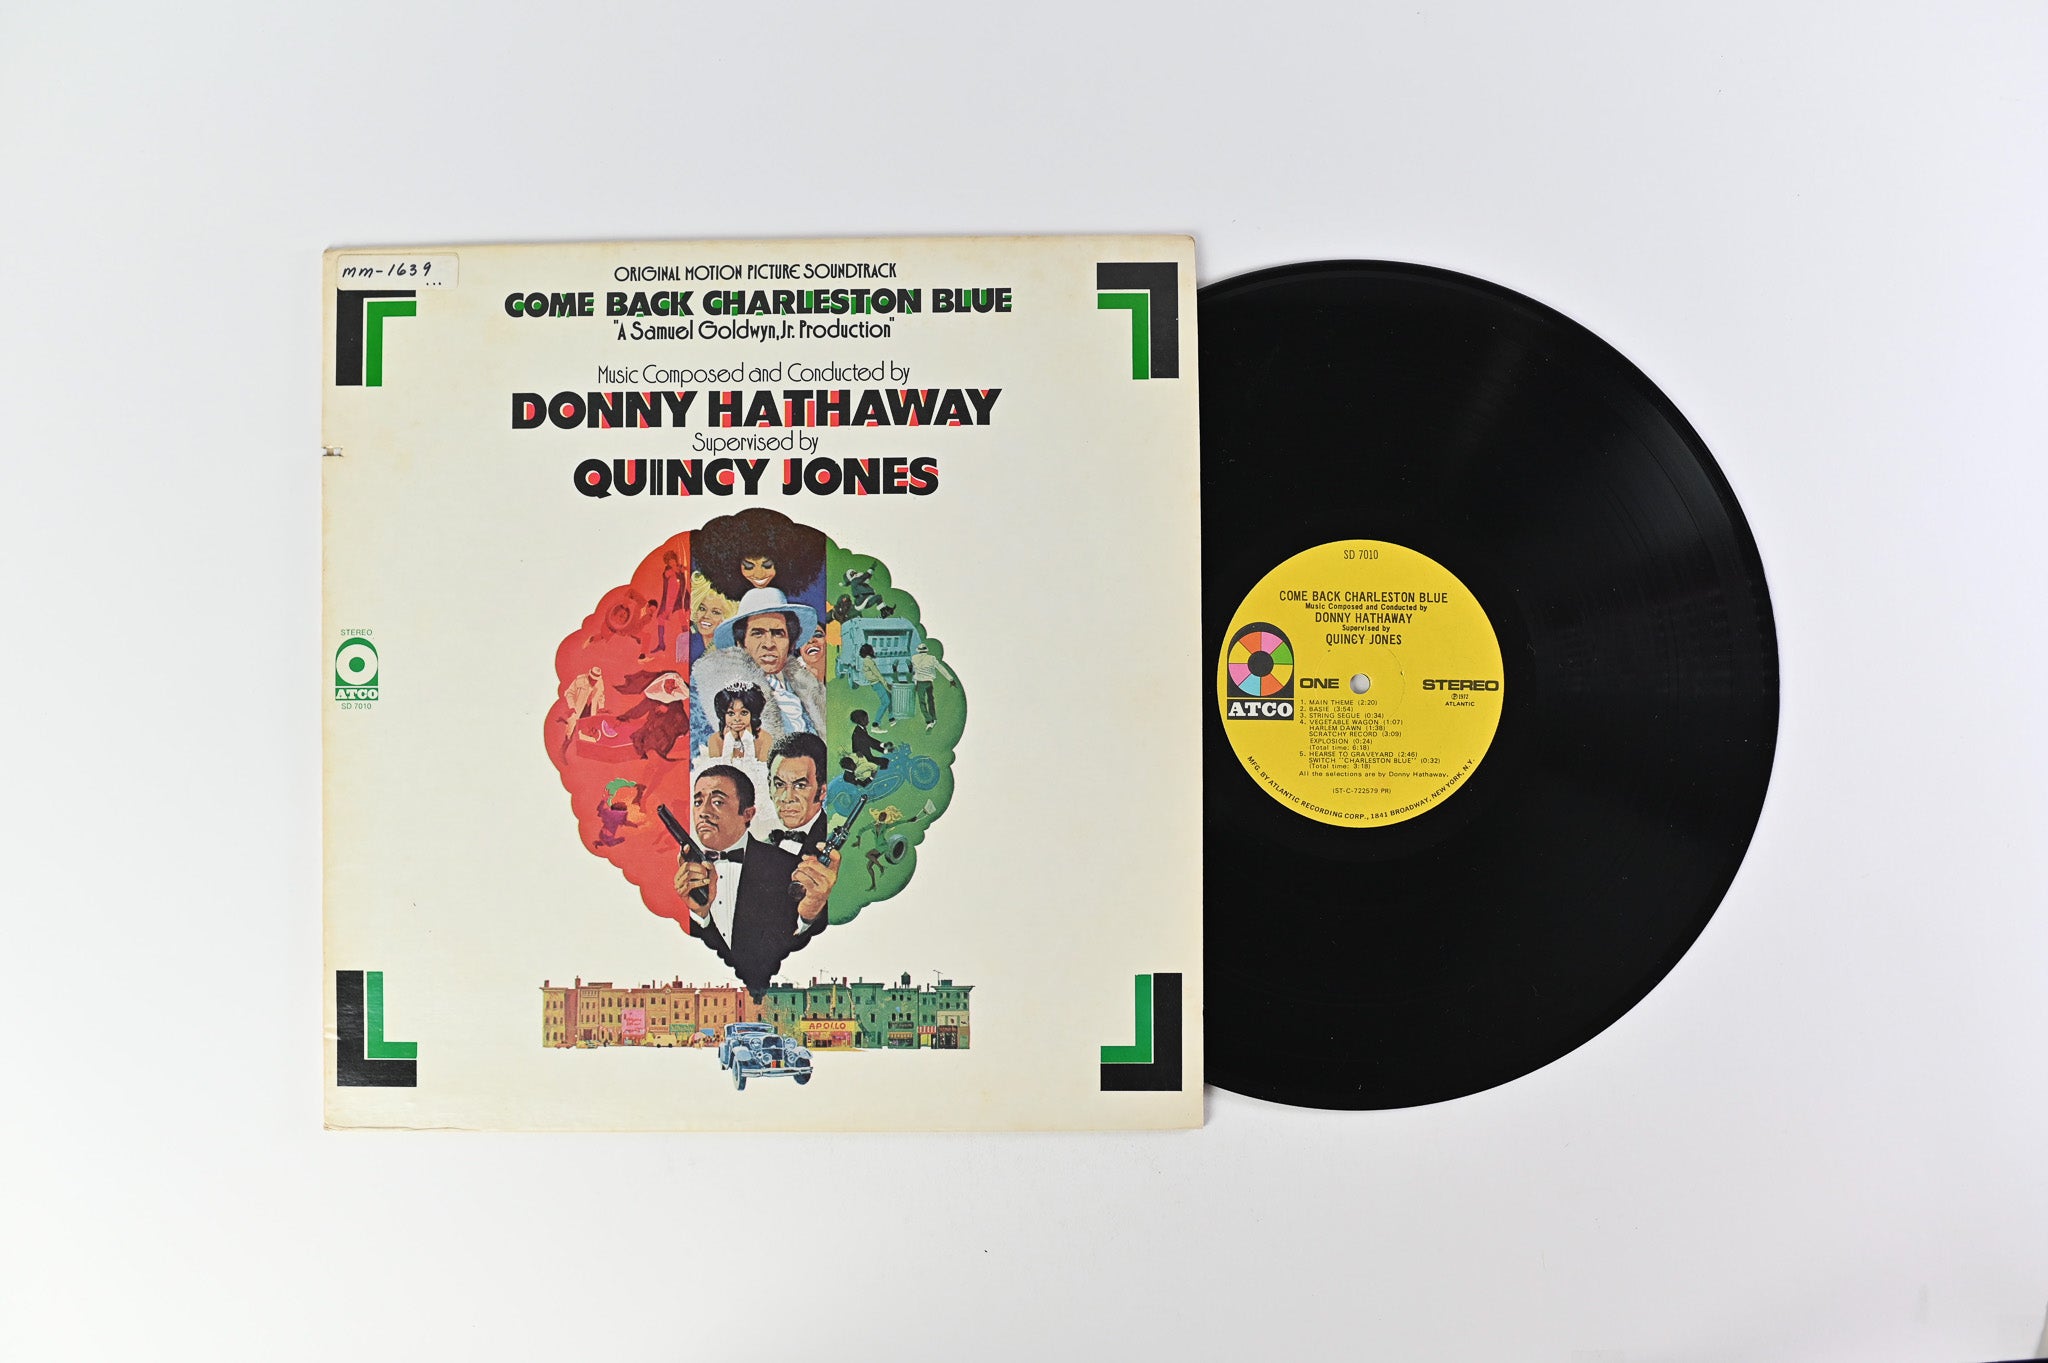 Donny Hathaway - Come Back Charleston Blue (Original Motion Picture Soundtrack) on ATCO Records